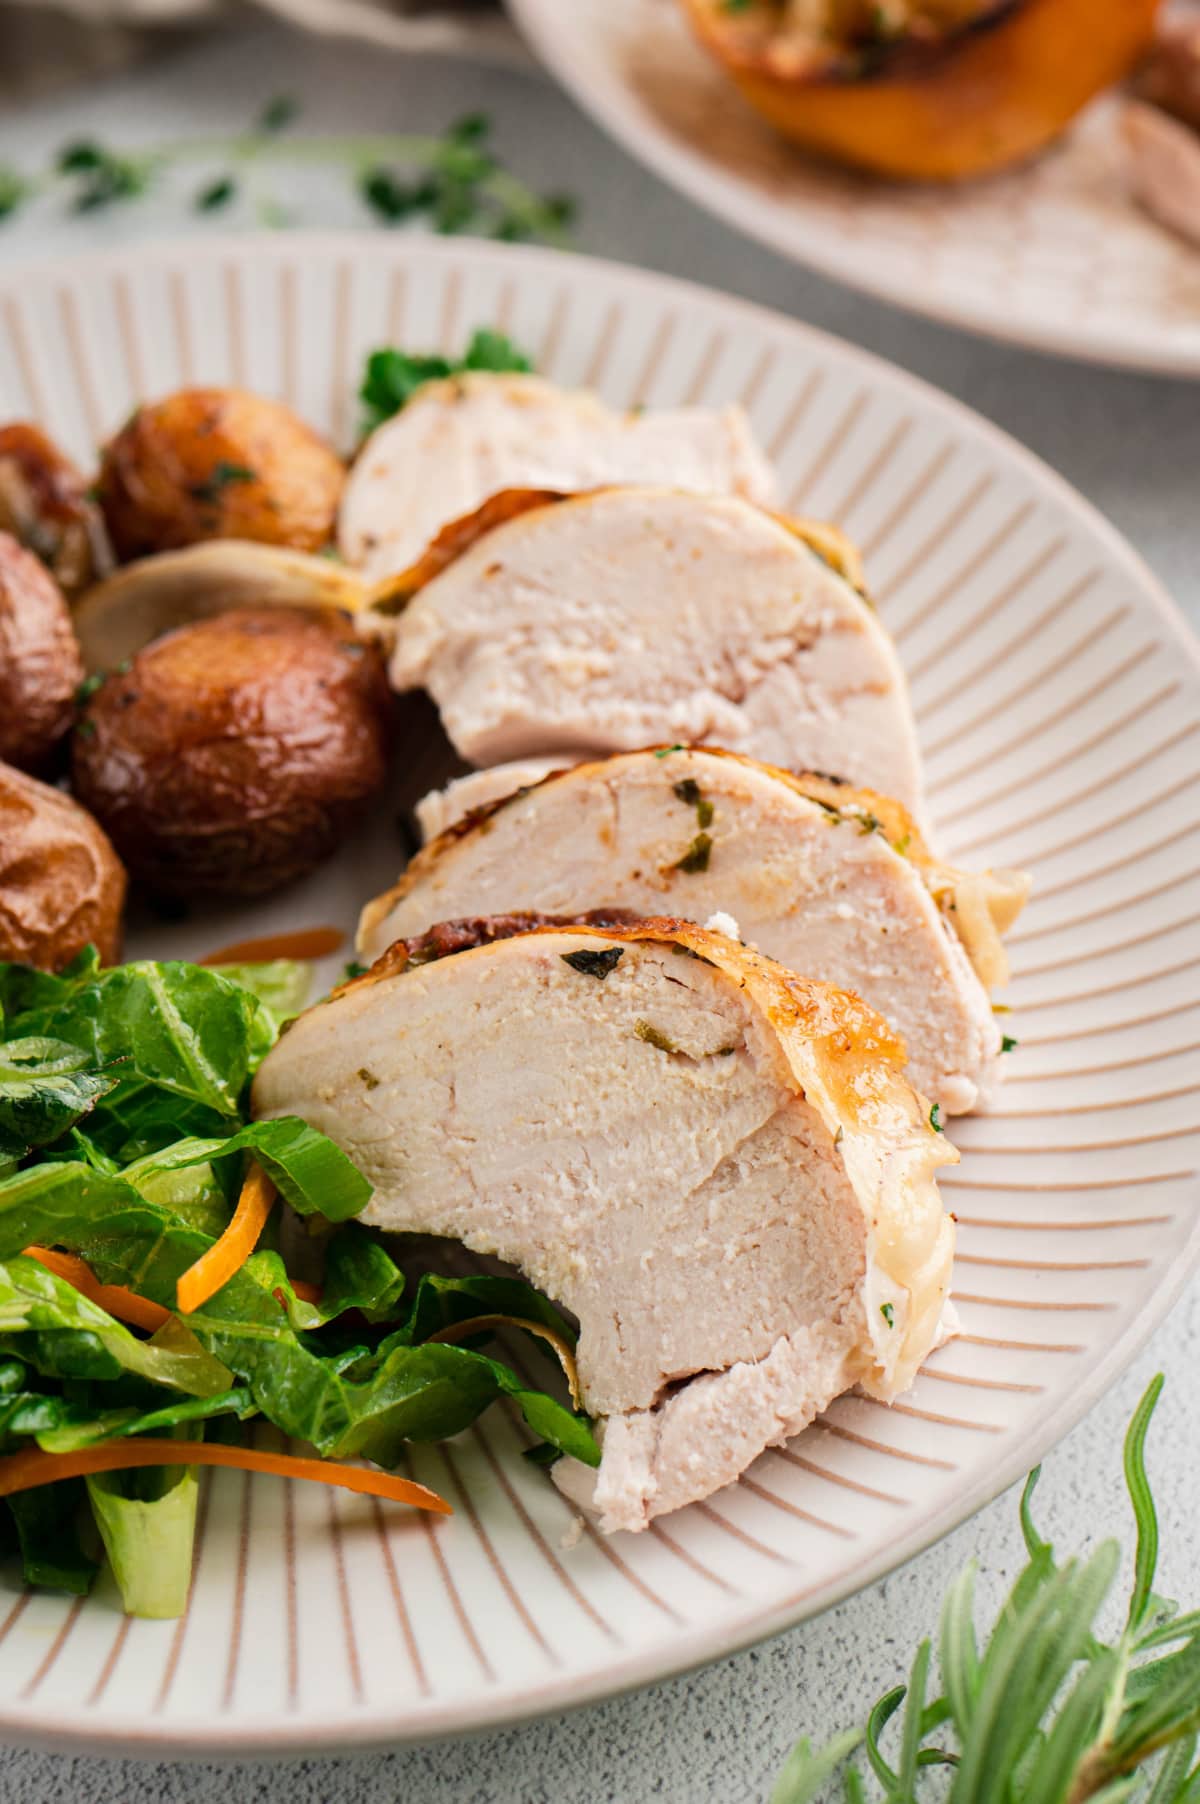 Sliced chicken breast on a plate with potatoes and salad greens.